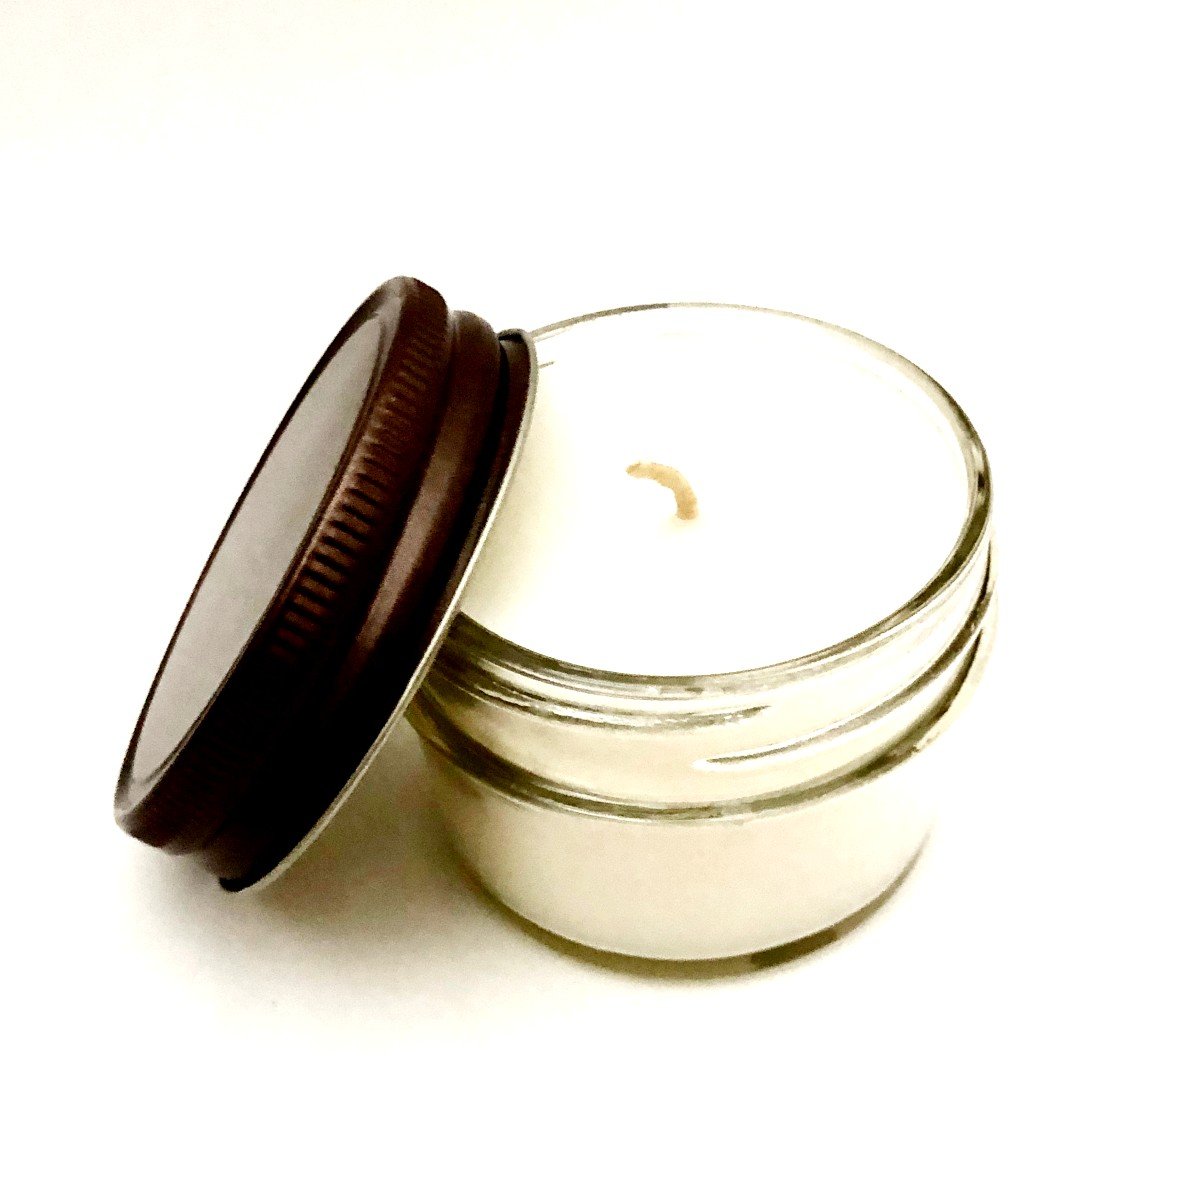 Small jar candle